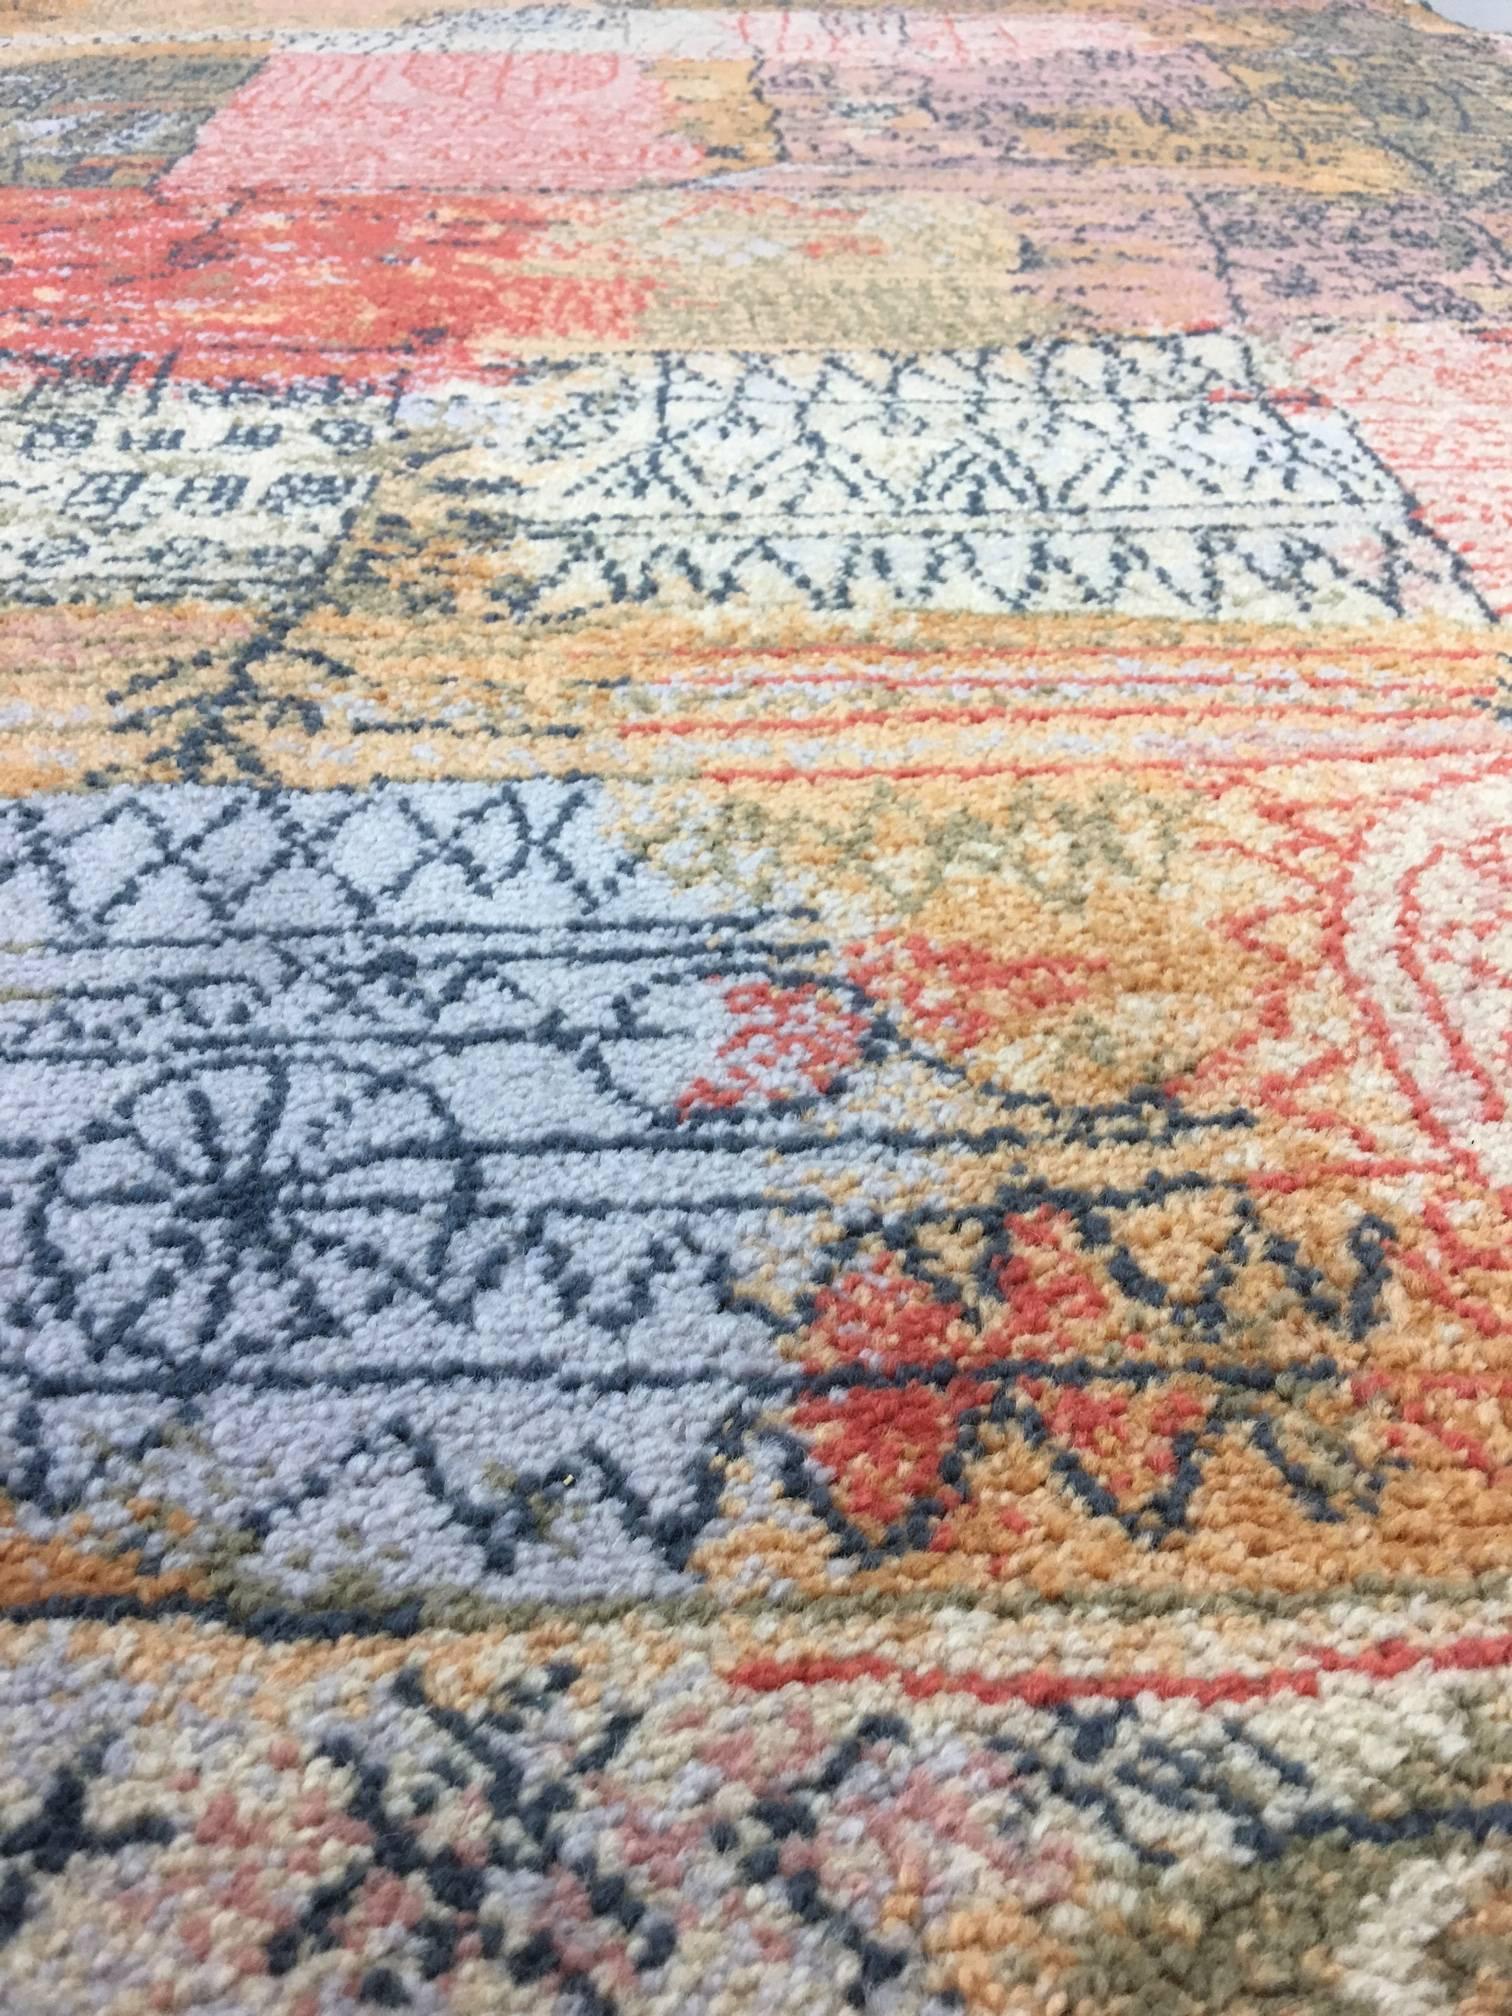 Absolutely wonderful Danish rug designed after Paul Klee for Ege Axminster. This is the smaller of two we have available. Rug has been professionally cleaned by renowned rug cleaner Robert Mann of Denver, Co. Measures: 4.7" x 6.7".